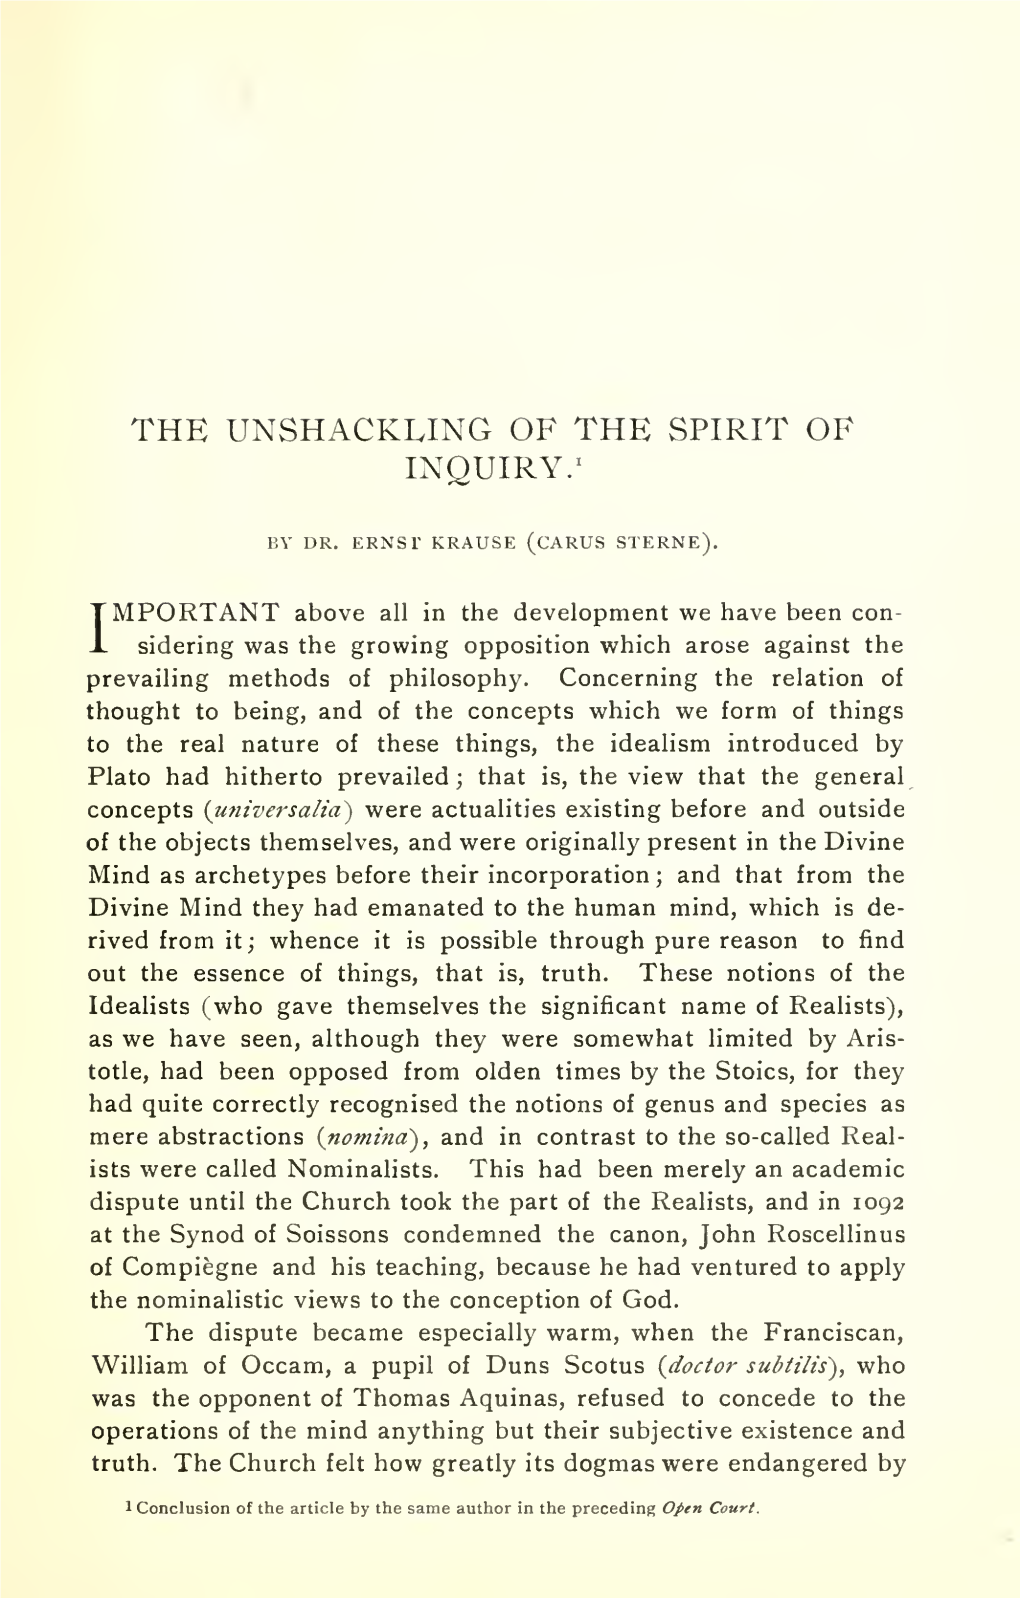 The Unshackling of the Spirit of Inquiry.'